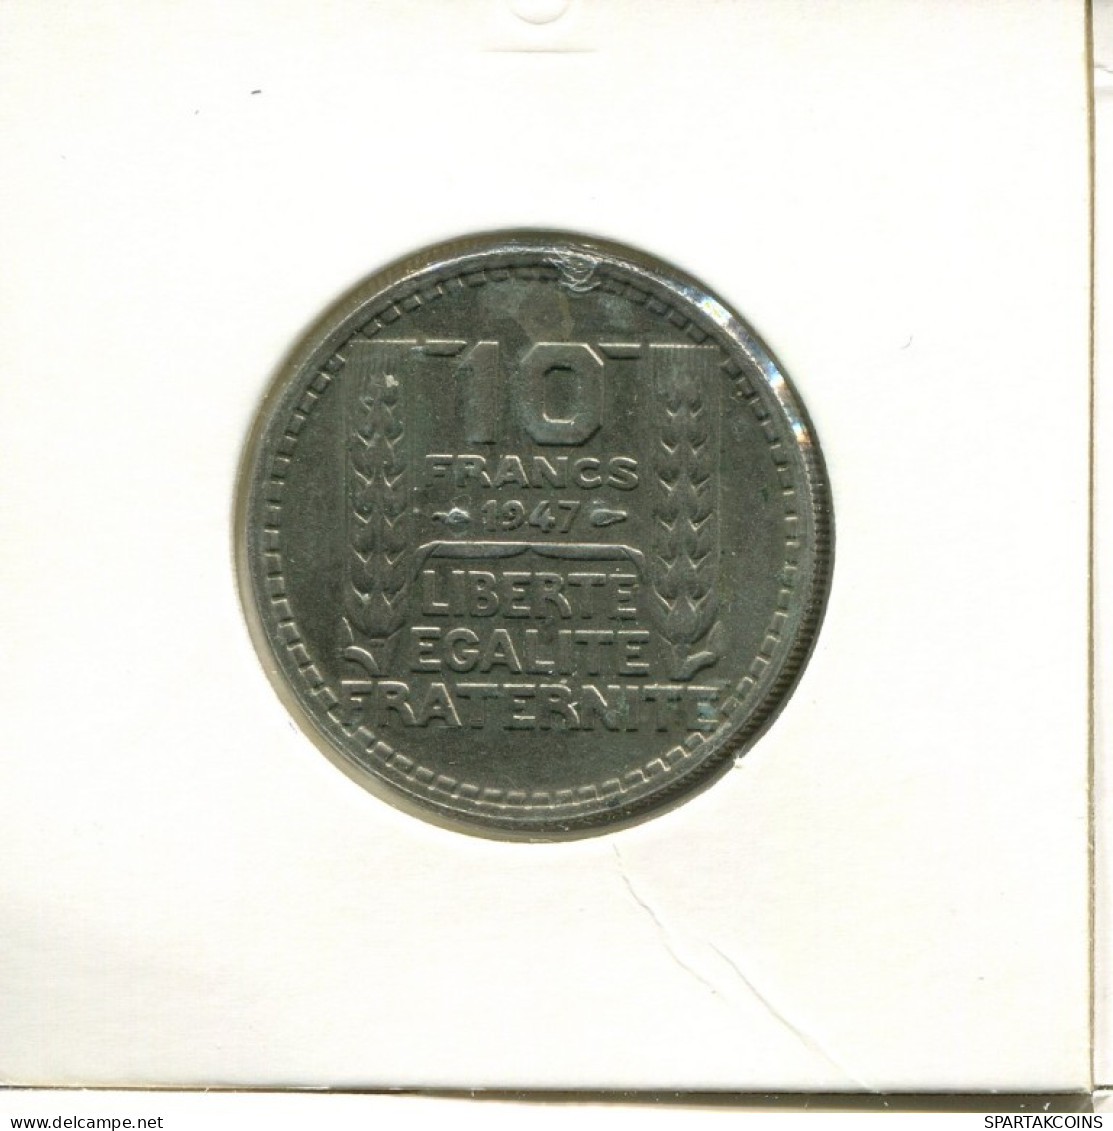 10 FRANCS 1947 FRANCE Coin French Coin #AK820.U.A - 10 Francs